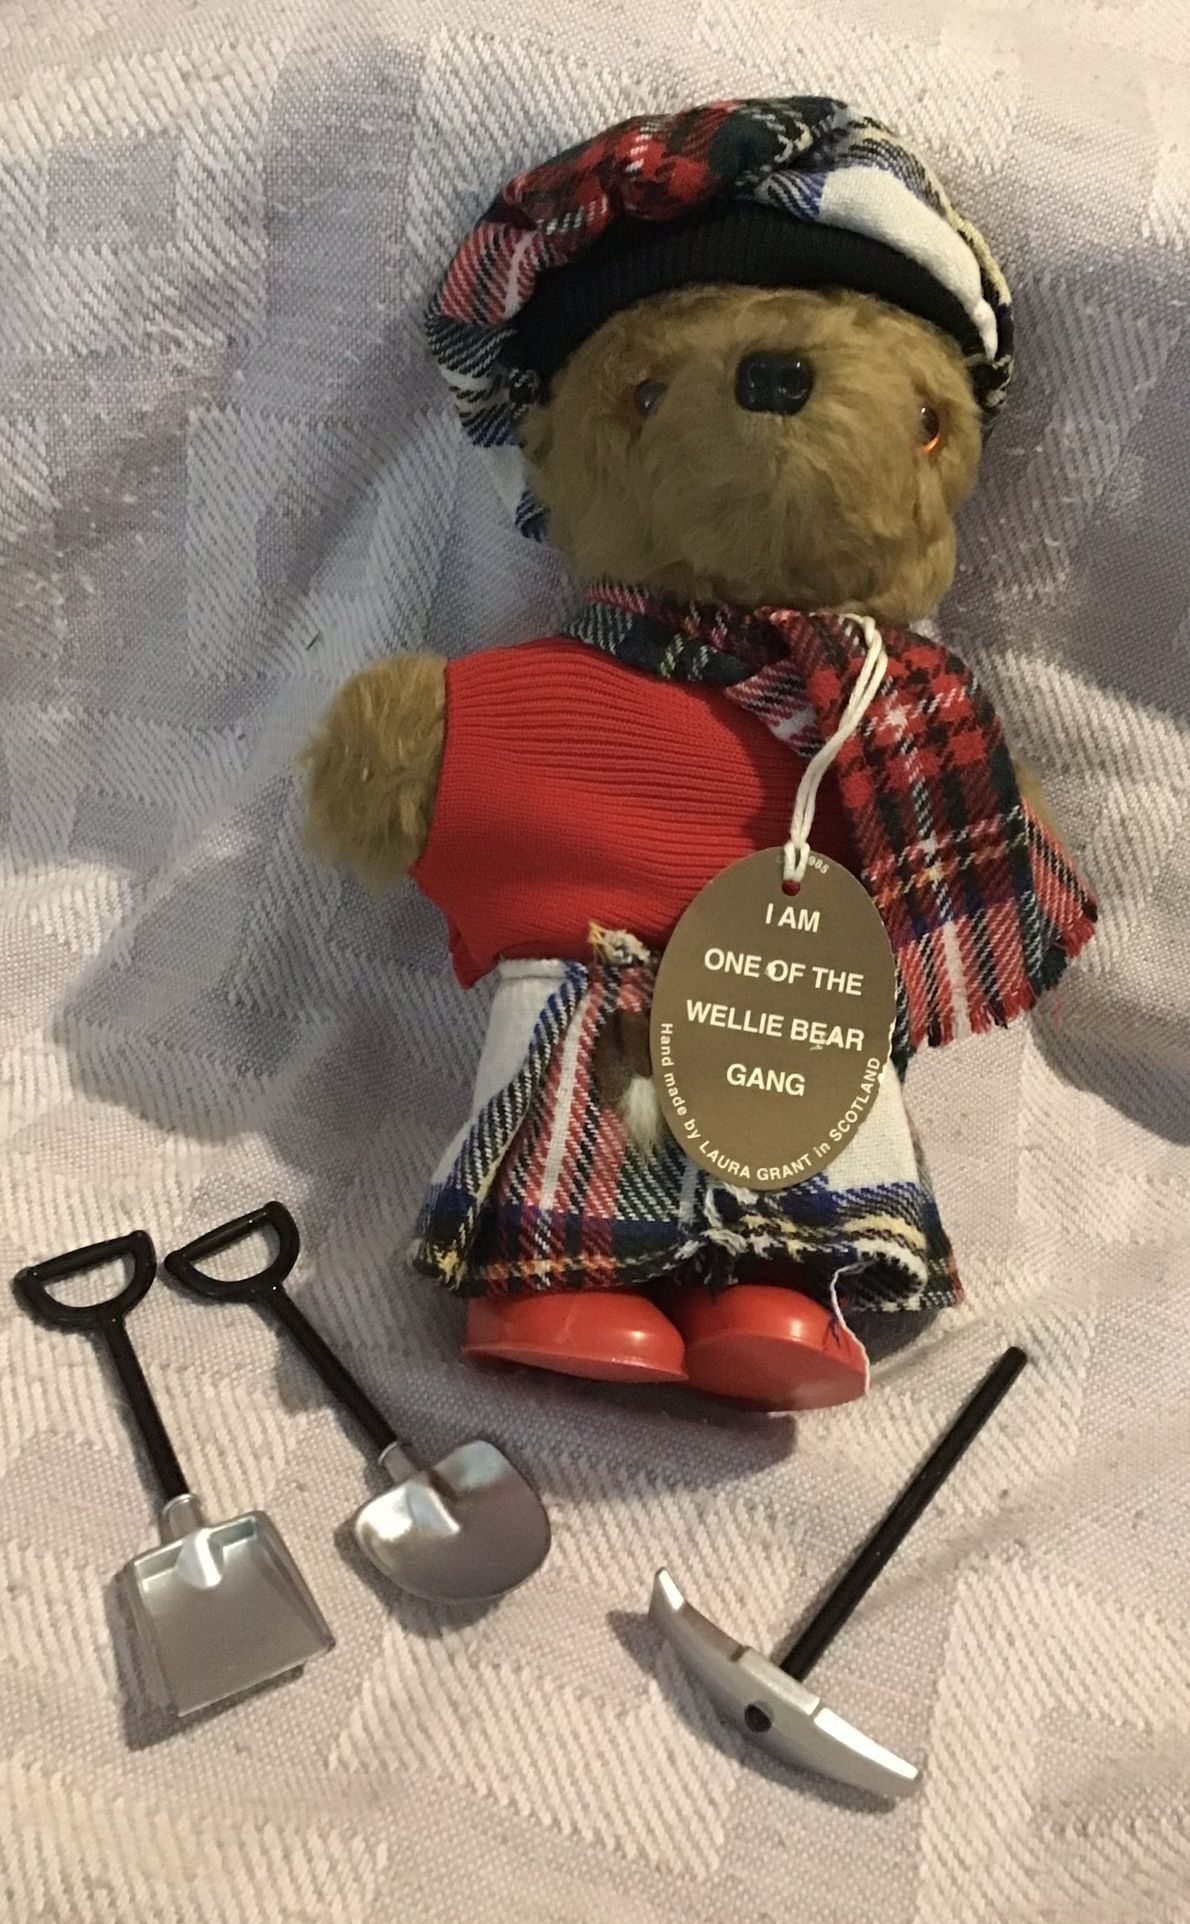 VTG Wellie Bear Gang 10.5" - Stuffed Teddy Hand Made in Scotland by Laura Grant With Tools